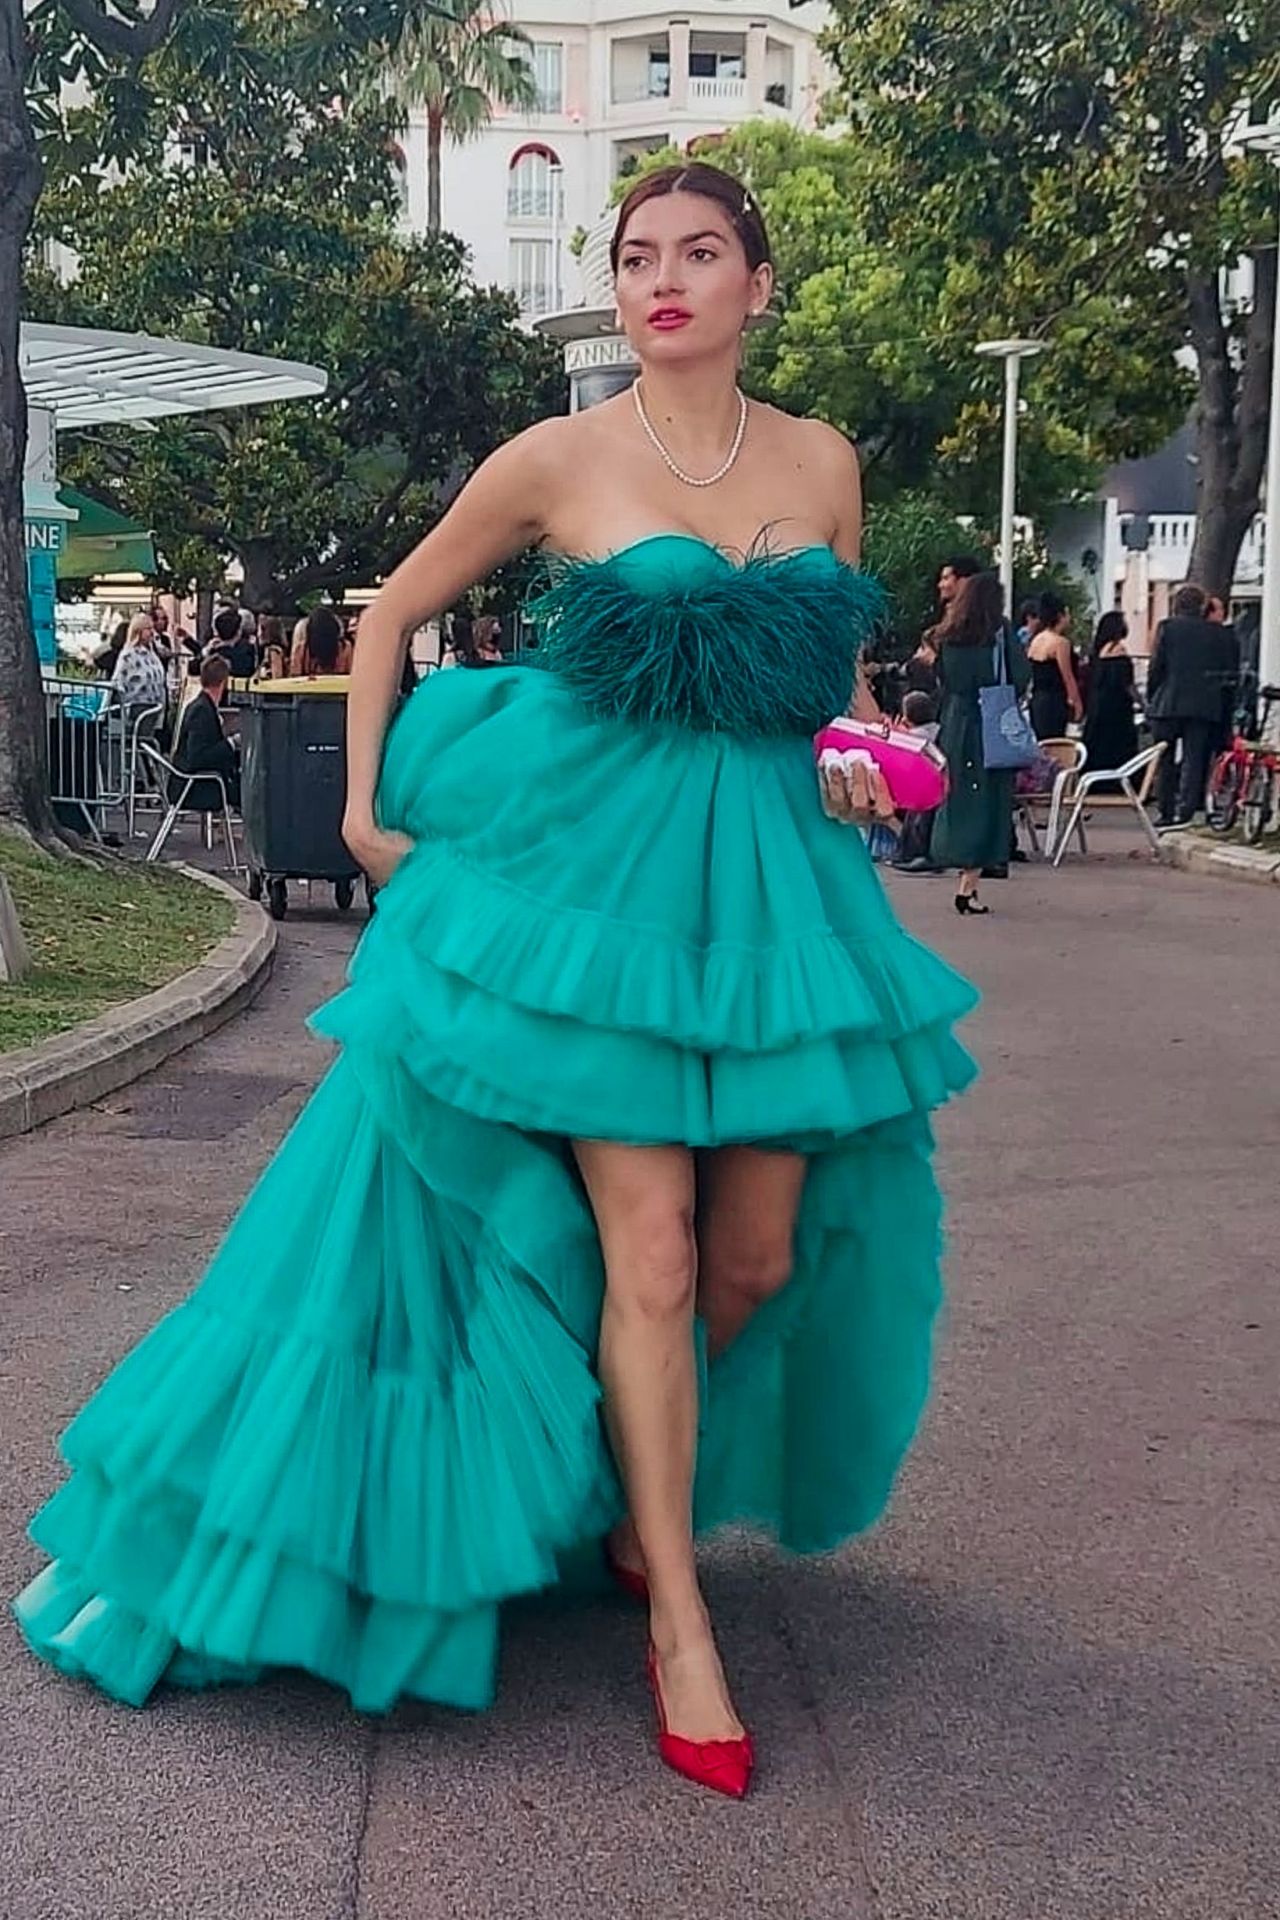 Blanca Blanco in a Green Gown - Photoshoot in Cannes 07/18/2021 ...